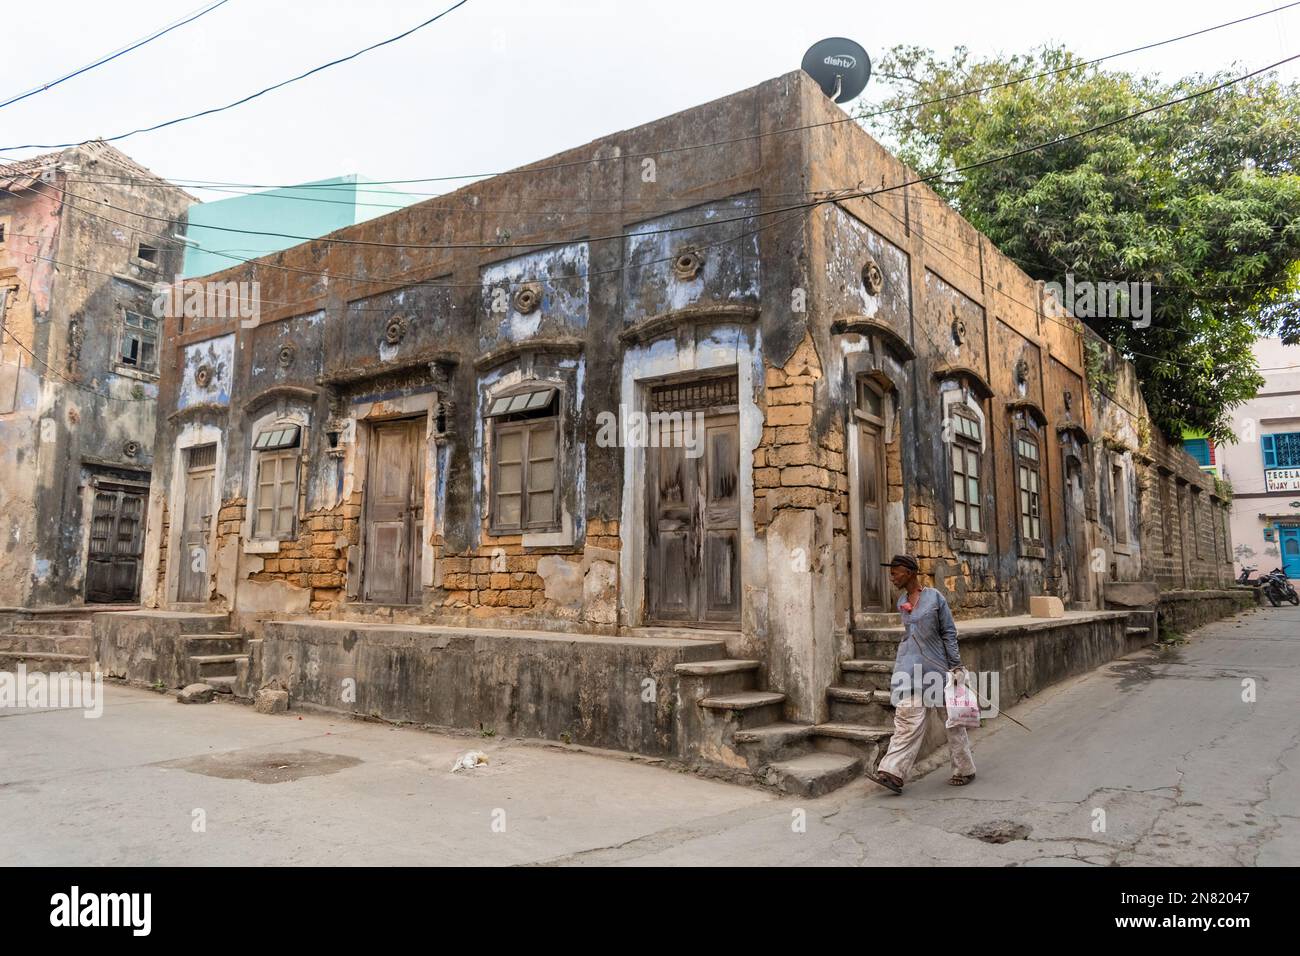 Diu, India - December 2018: A man walking past an old dilapidated Portuguese era building in the island town of Diu. Stock Photo